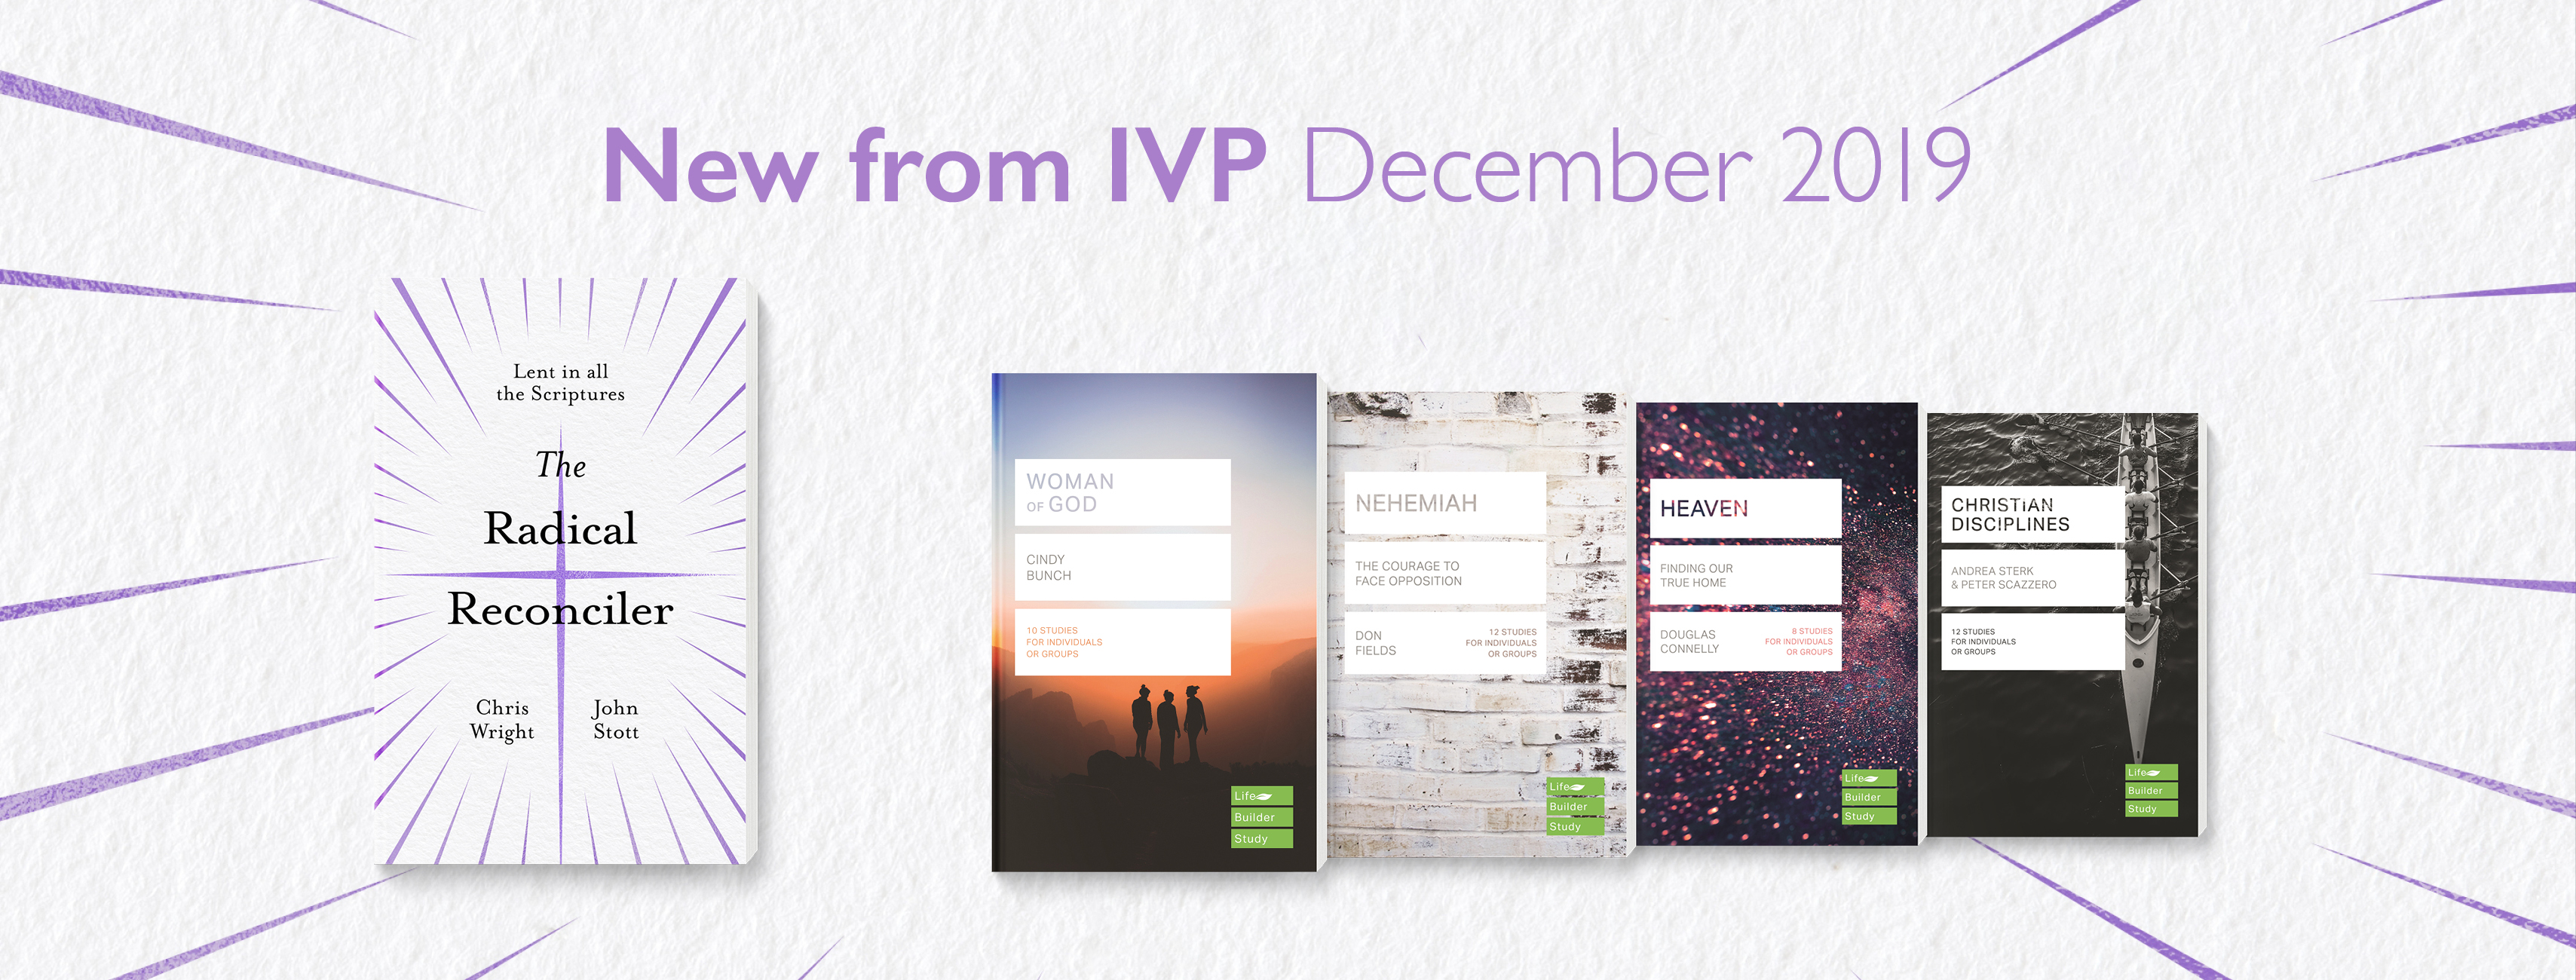 The IVP December 2019 Releases